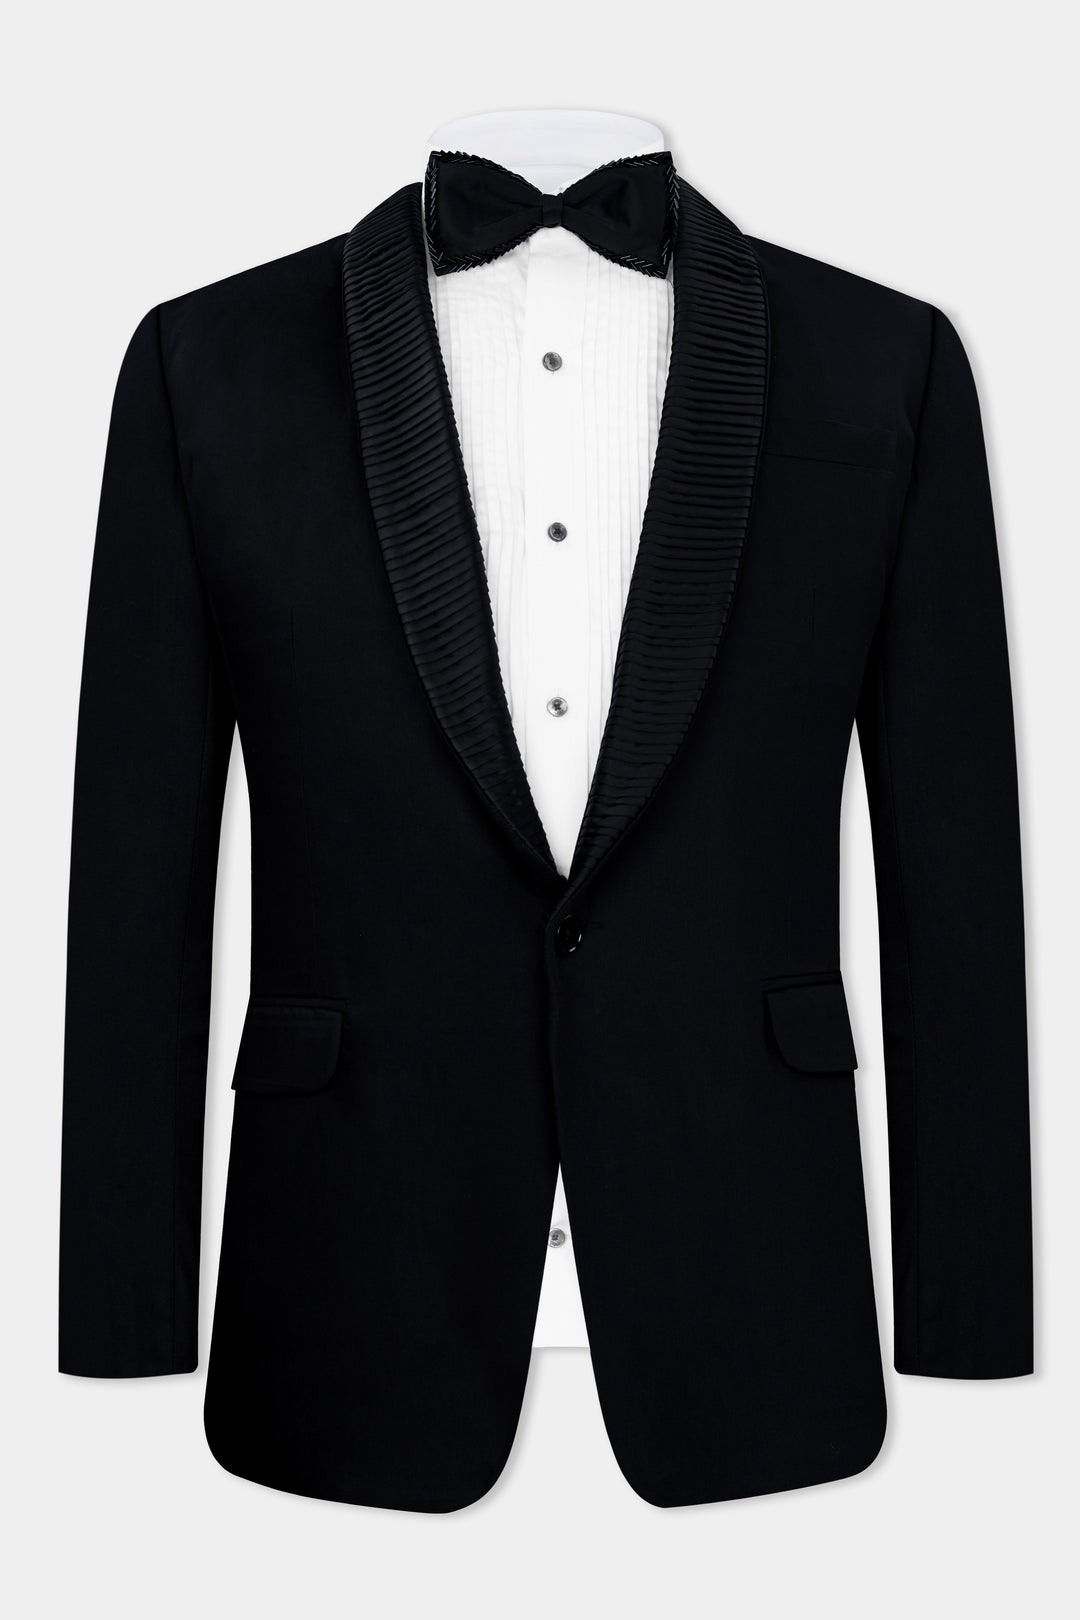 Discover more than 159 black suit without tie best